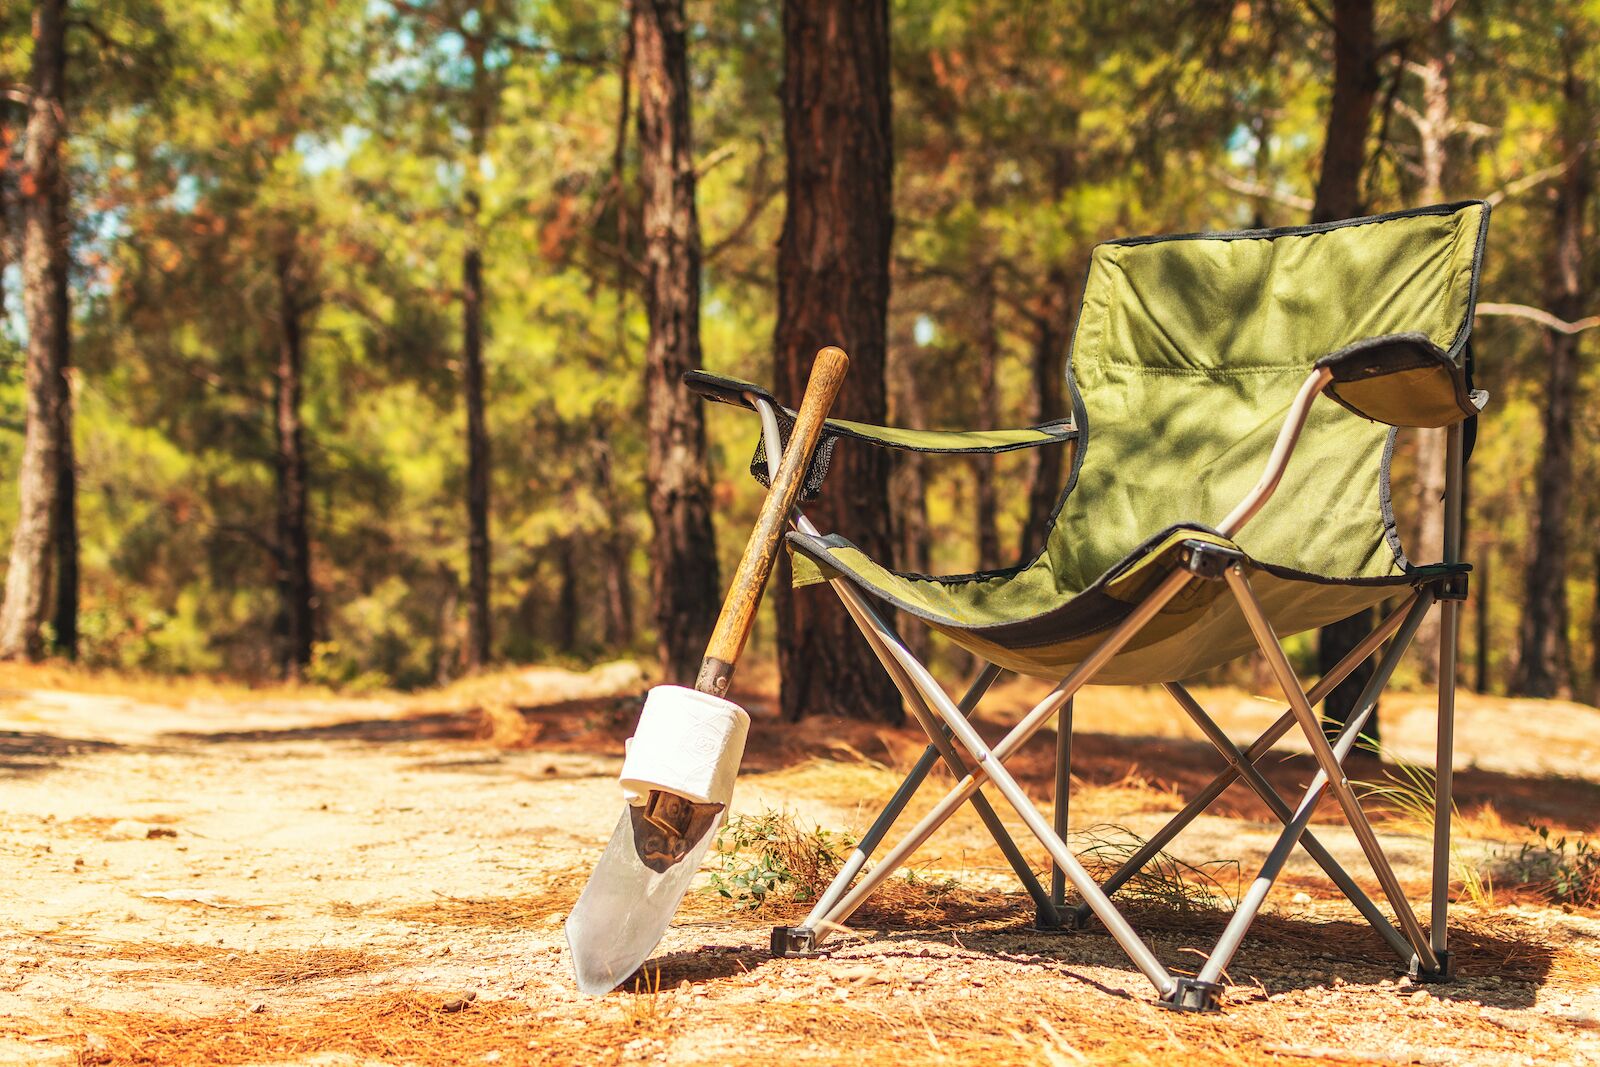 shovel and roll of toilet paper leaning up against a green camping chair in the woods - how to poop in the woods